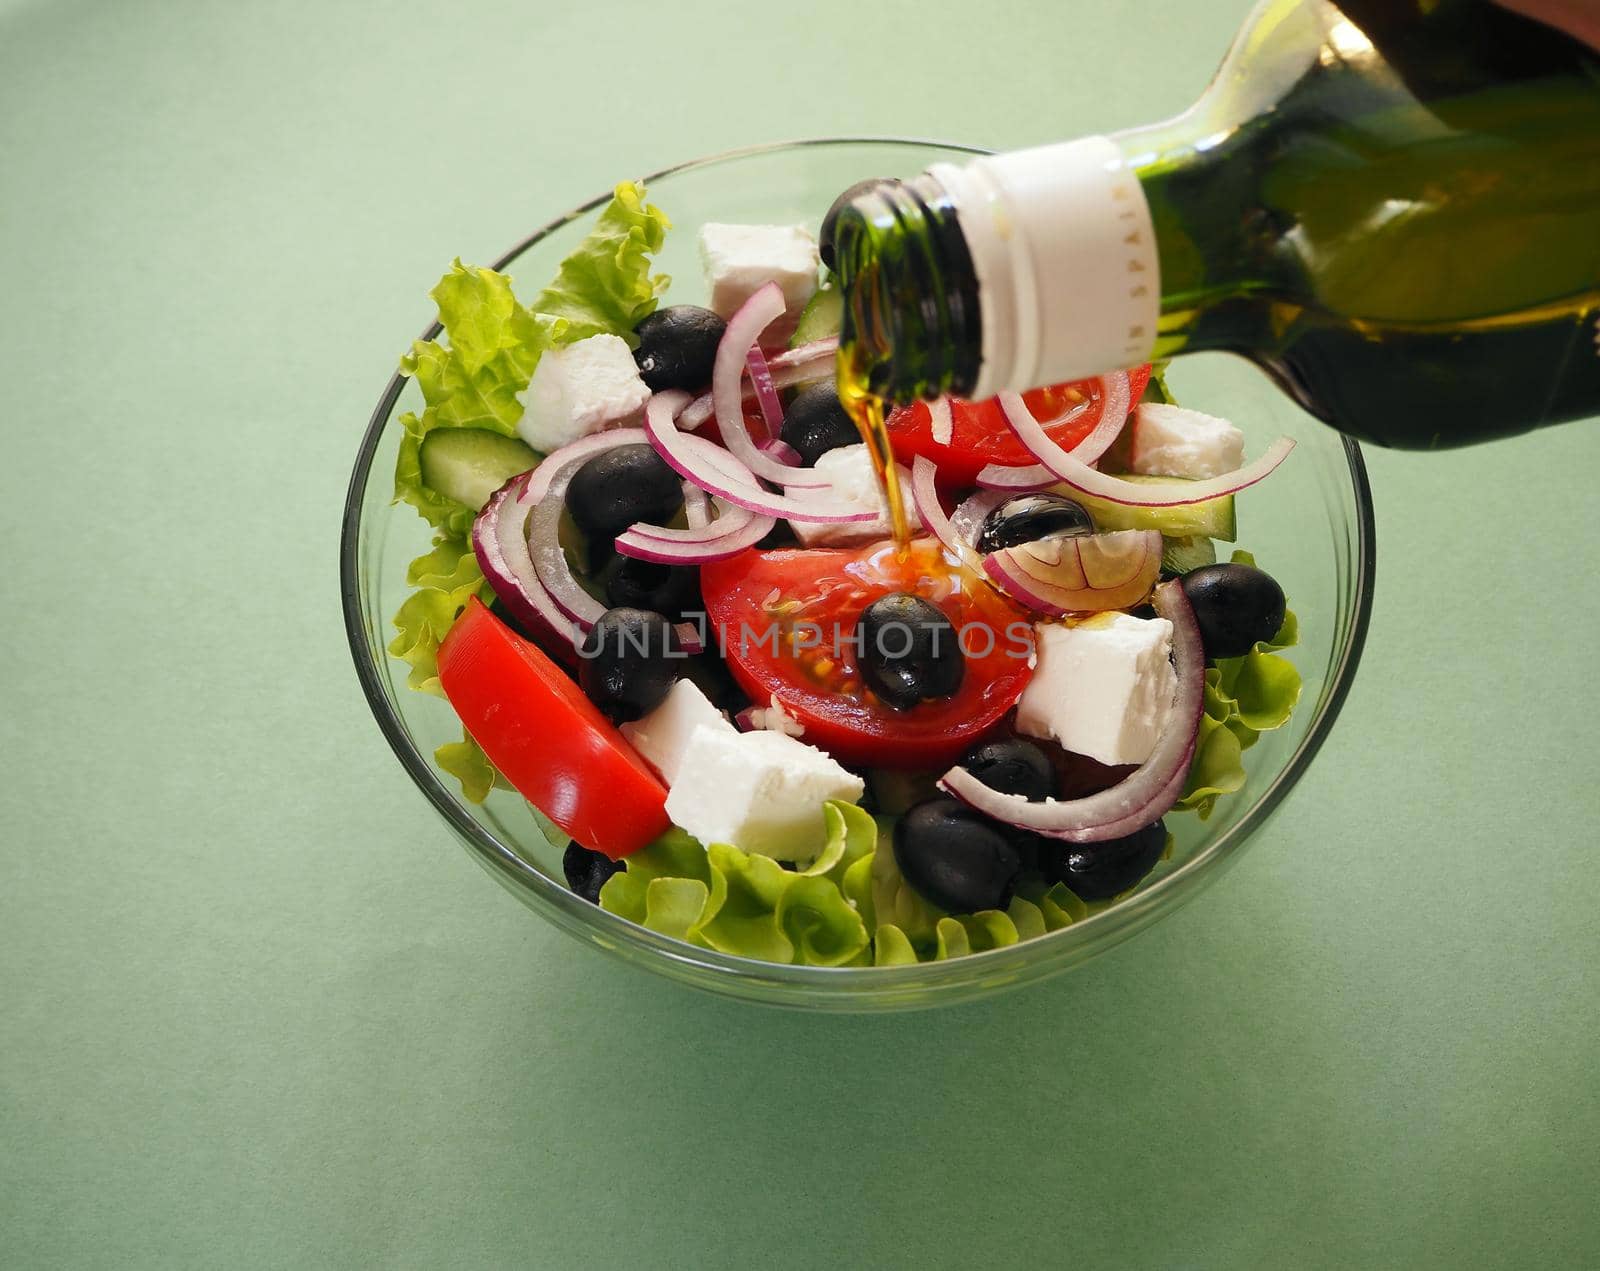 Greek fresh vegetable salad with feta cheese and olive oil in a bowl. Close-up, high-quality photo.